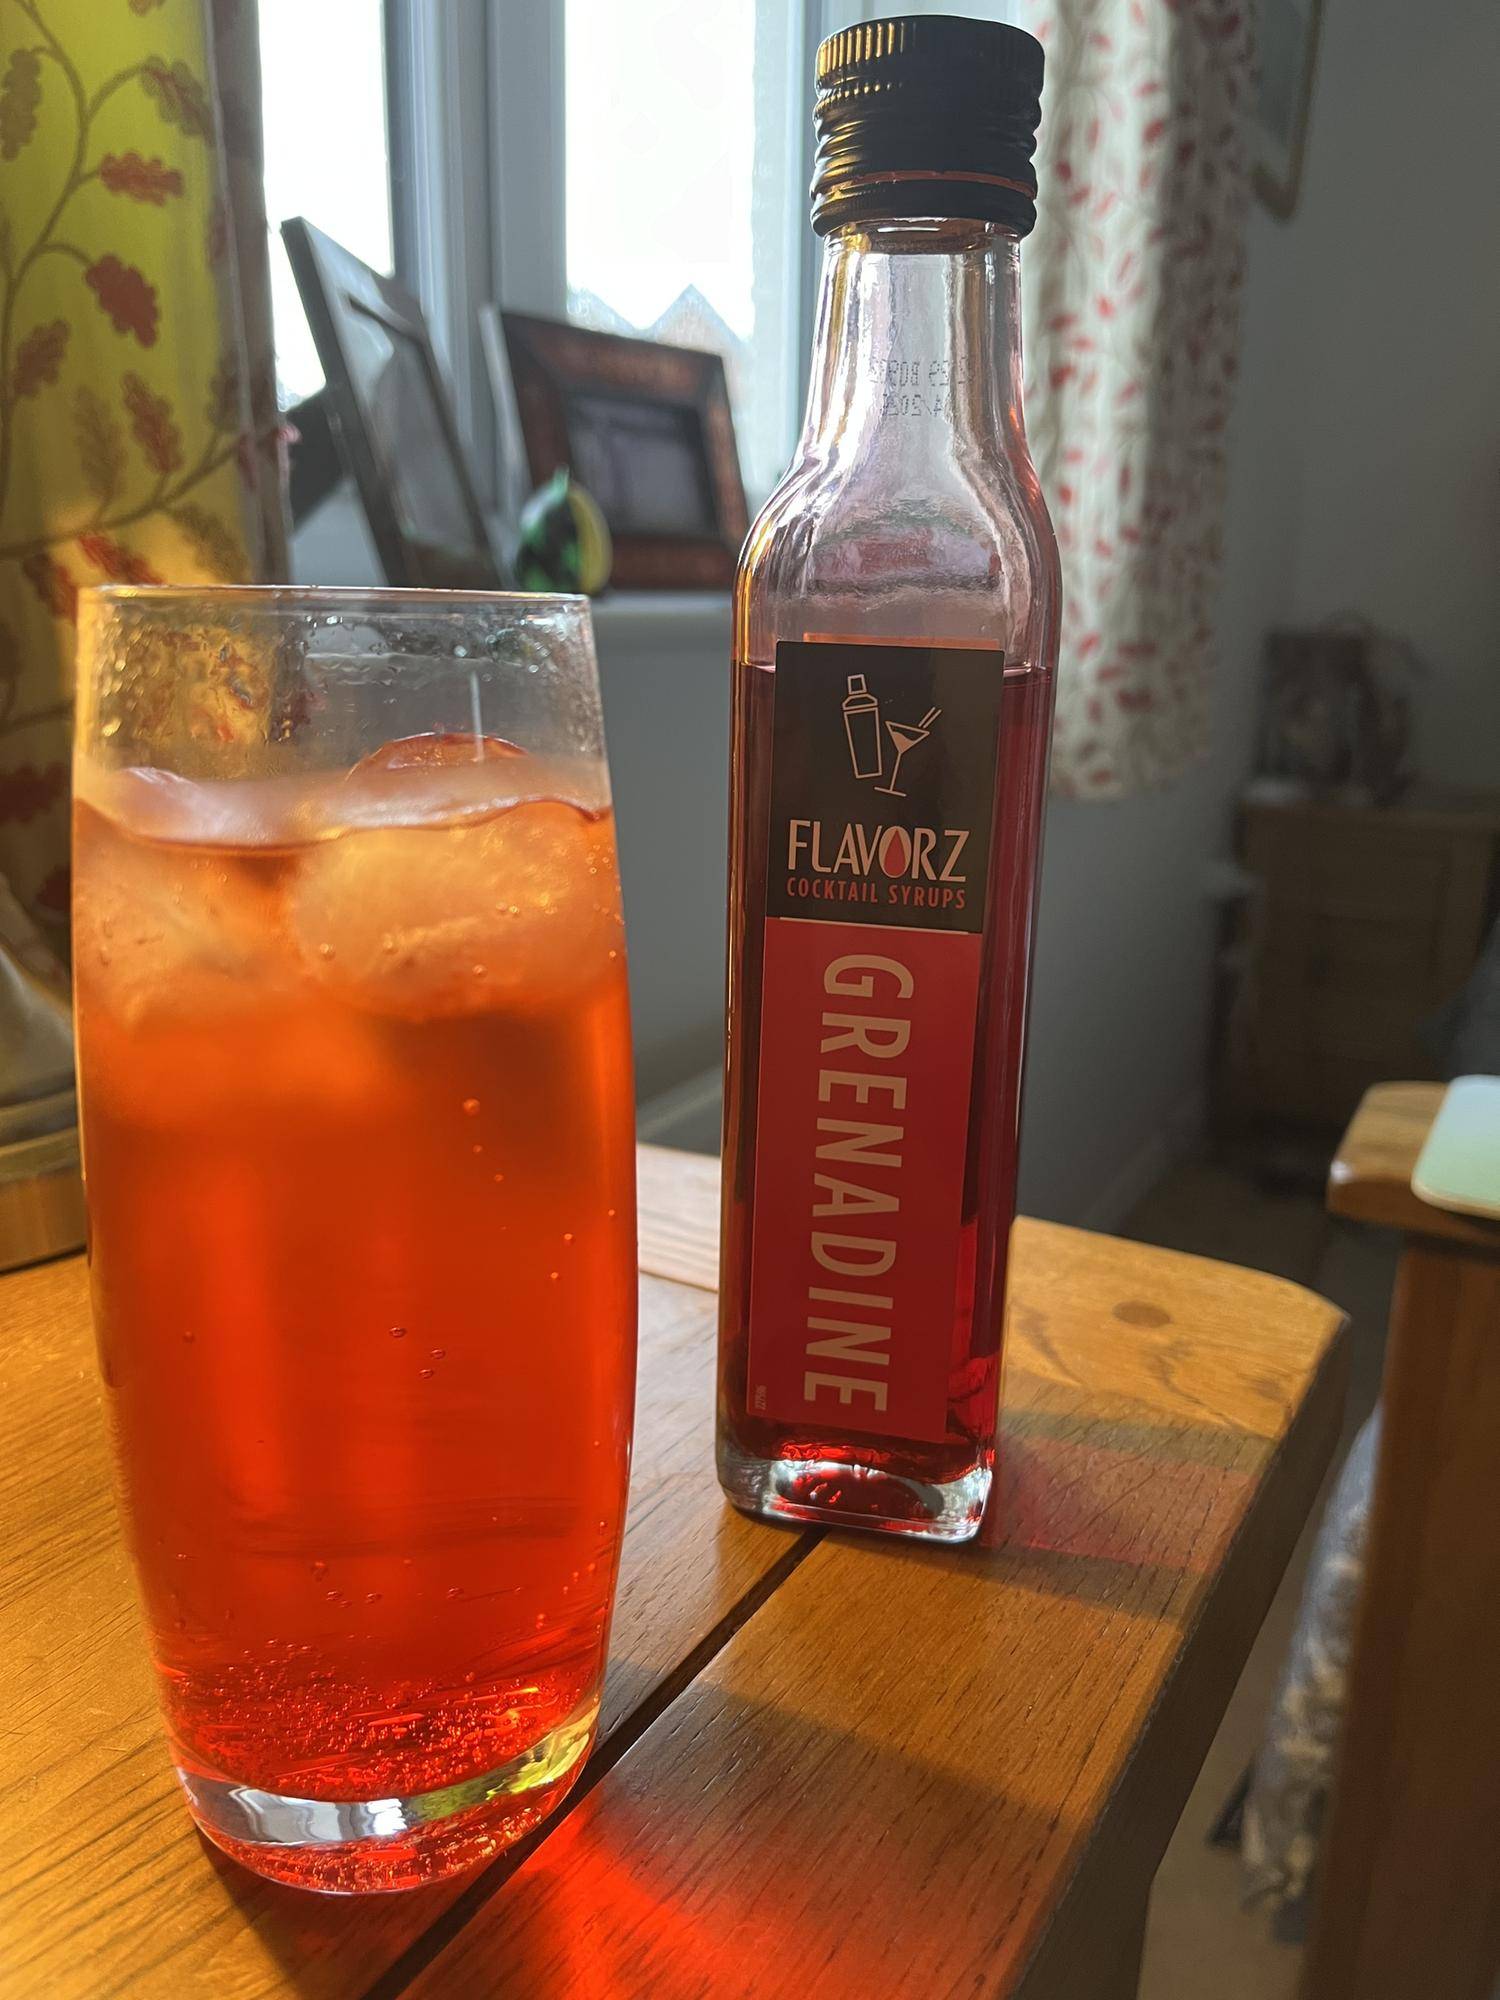 Grenadine makes a great diabolo but you can get creative and try all sorts with lemonade